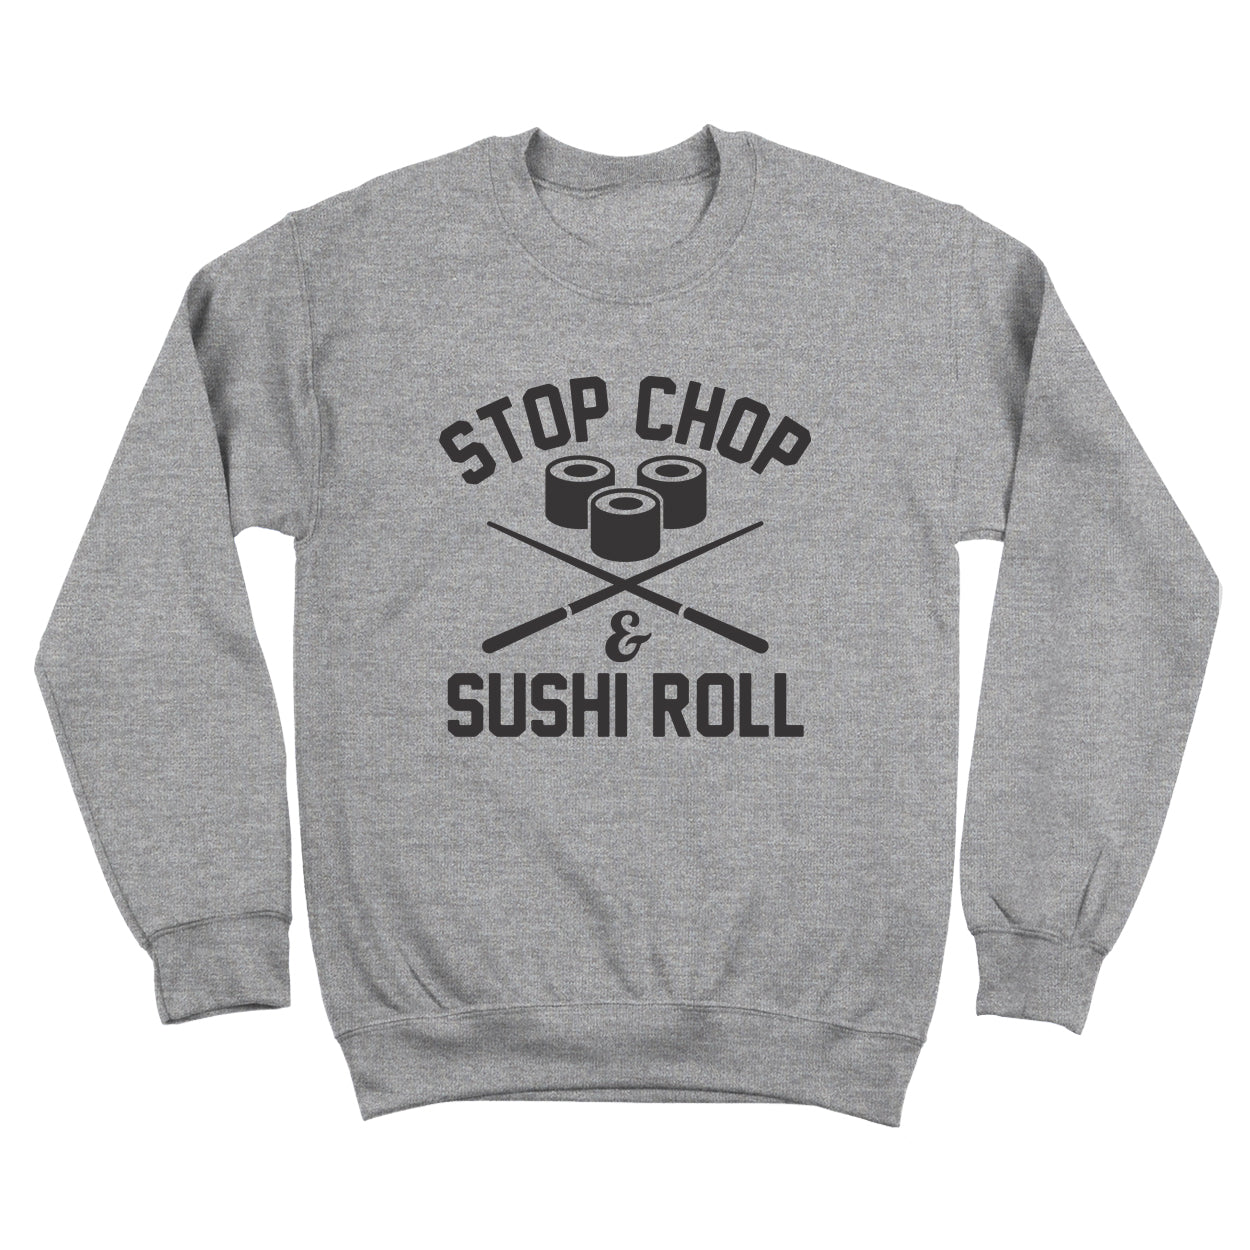 Stop shop sushi roll - DonkeyTees